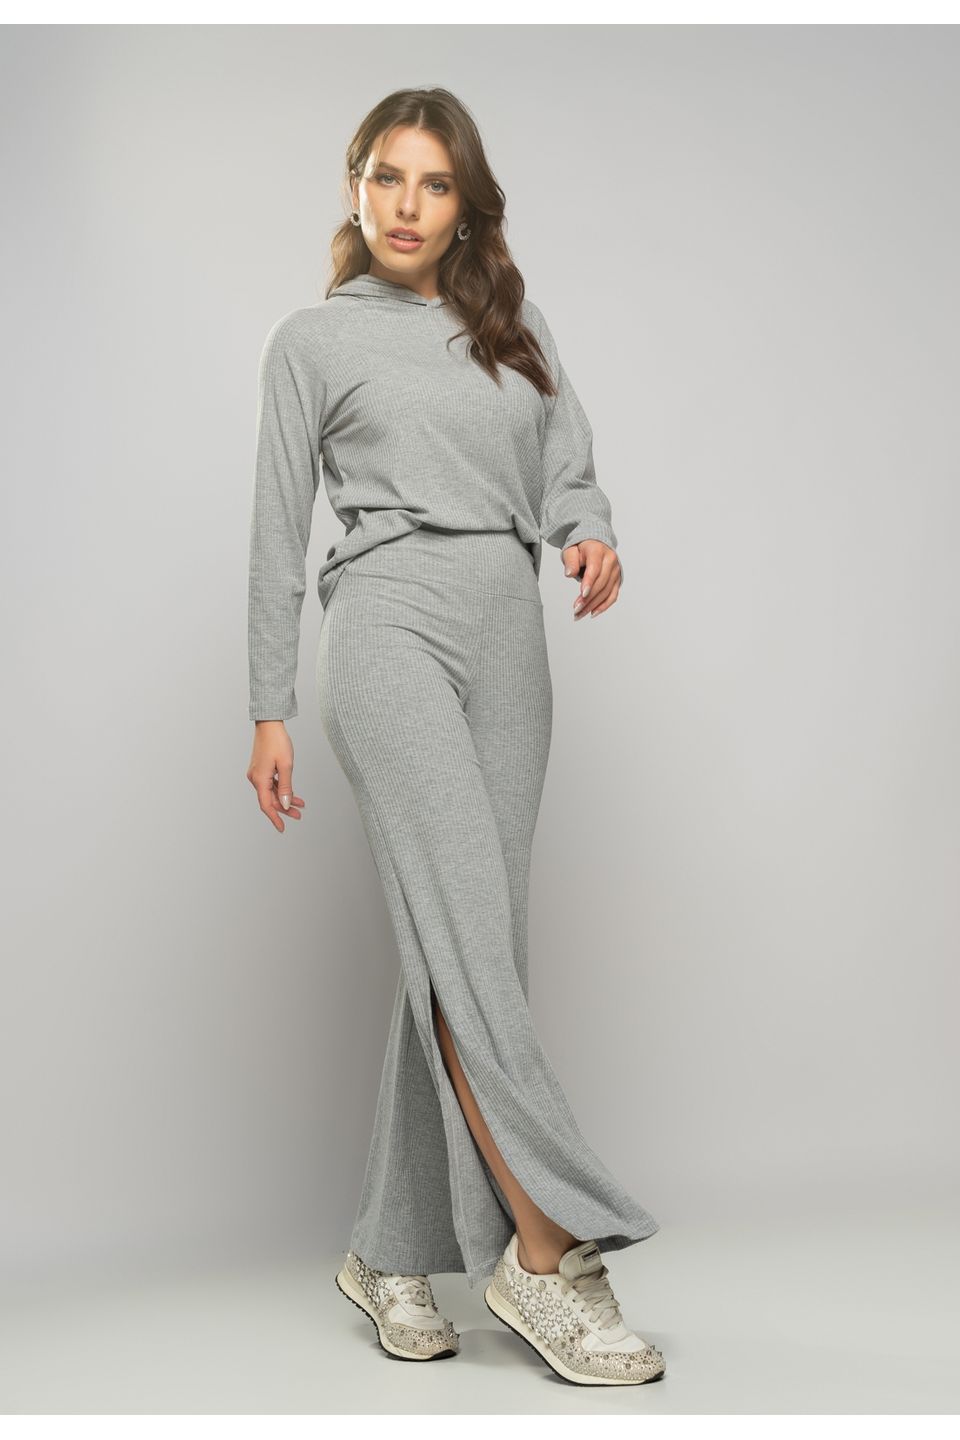 Calça flare Cintura alta  Flared pants outfit, Grey flare pants outfit,  Outfits